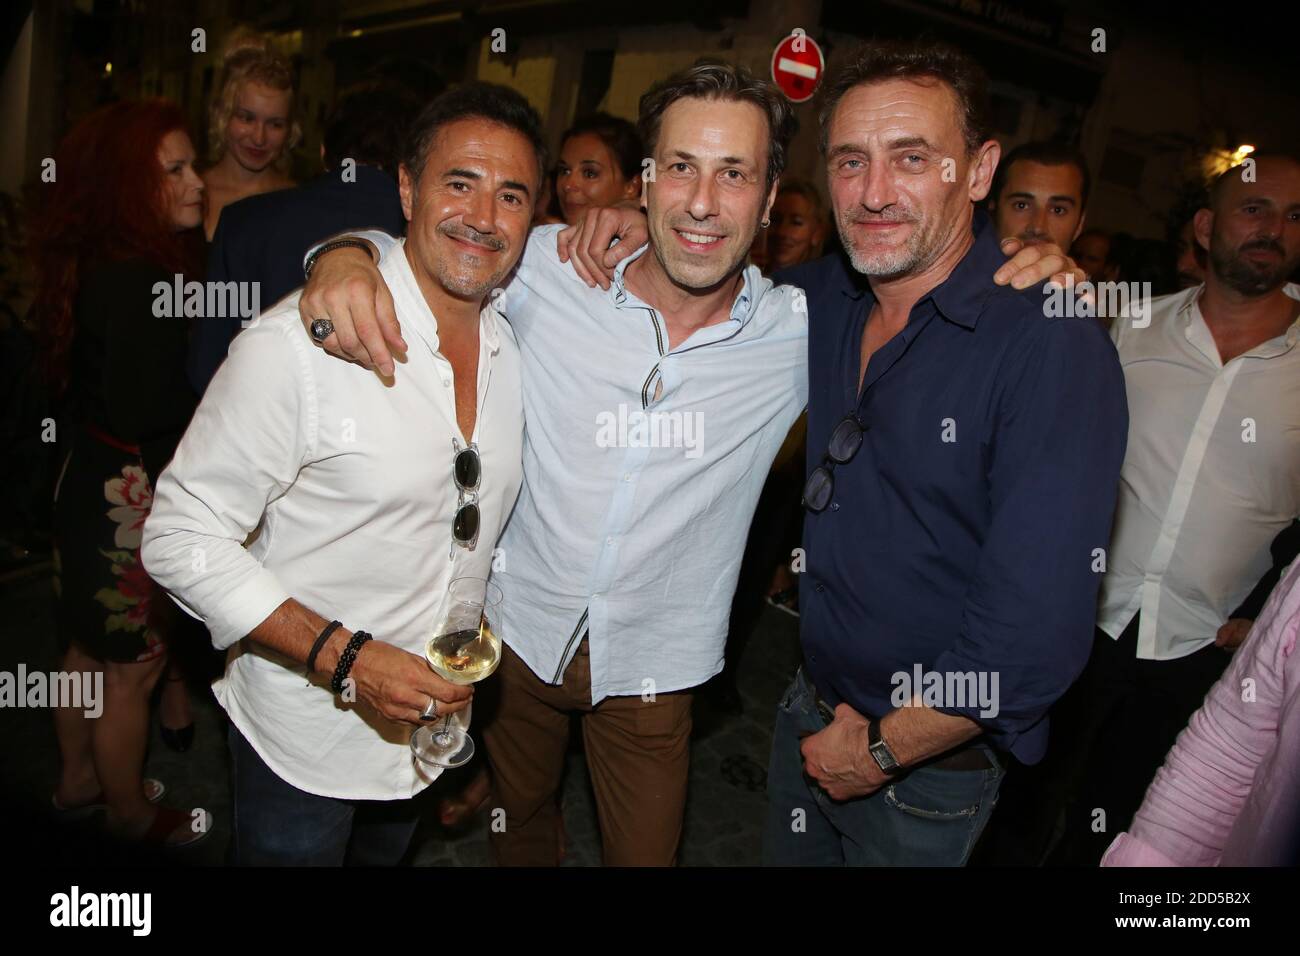 Exclusive - Jose garcia, Patrice Beligot and Jean-Paul Rouve attending  After party Lola et ses freres during the 11th Angouleme Film Festival, in  Angouleme, France on August 21, 2018. Photo by Jerome